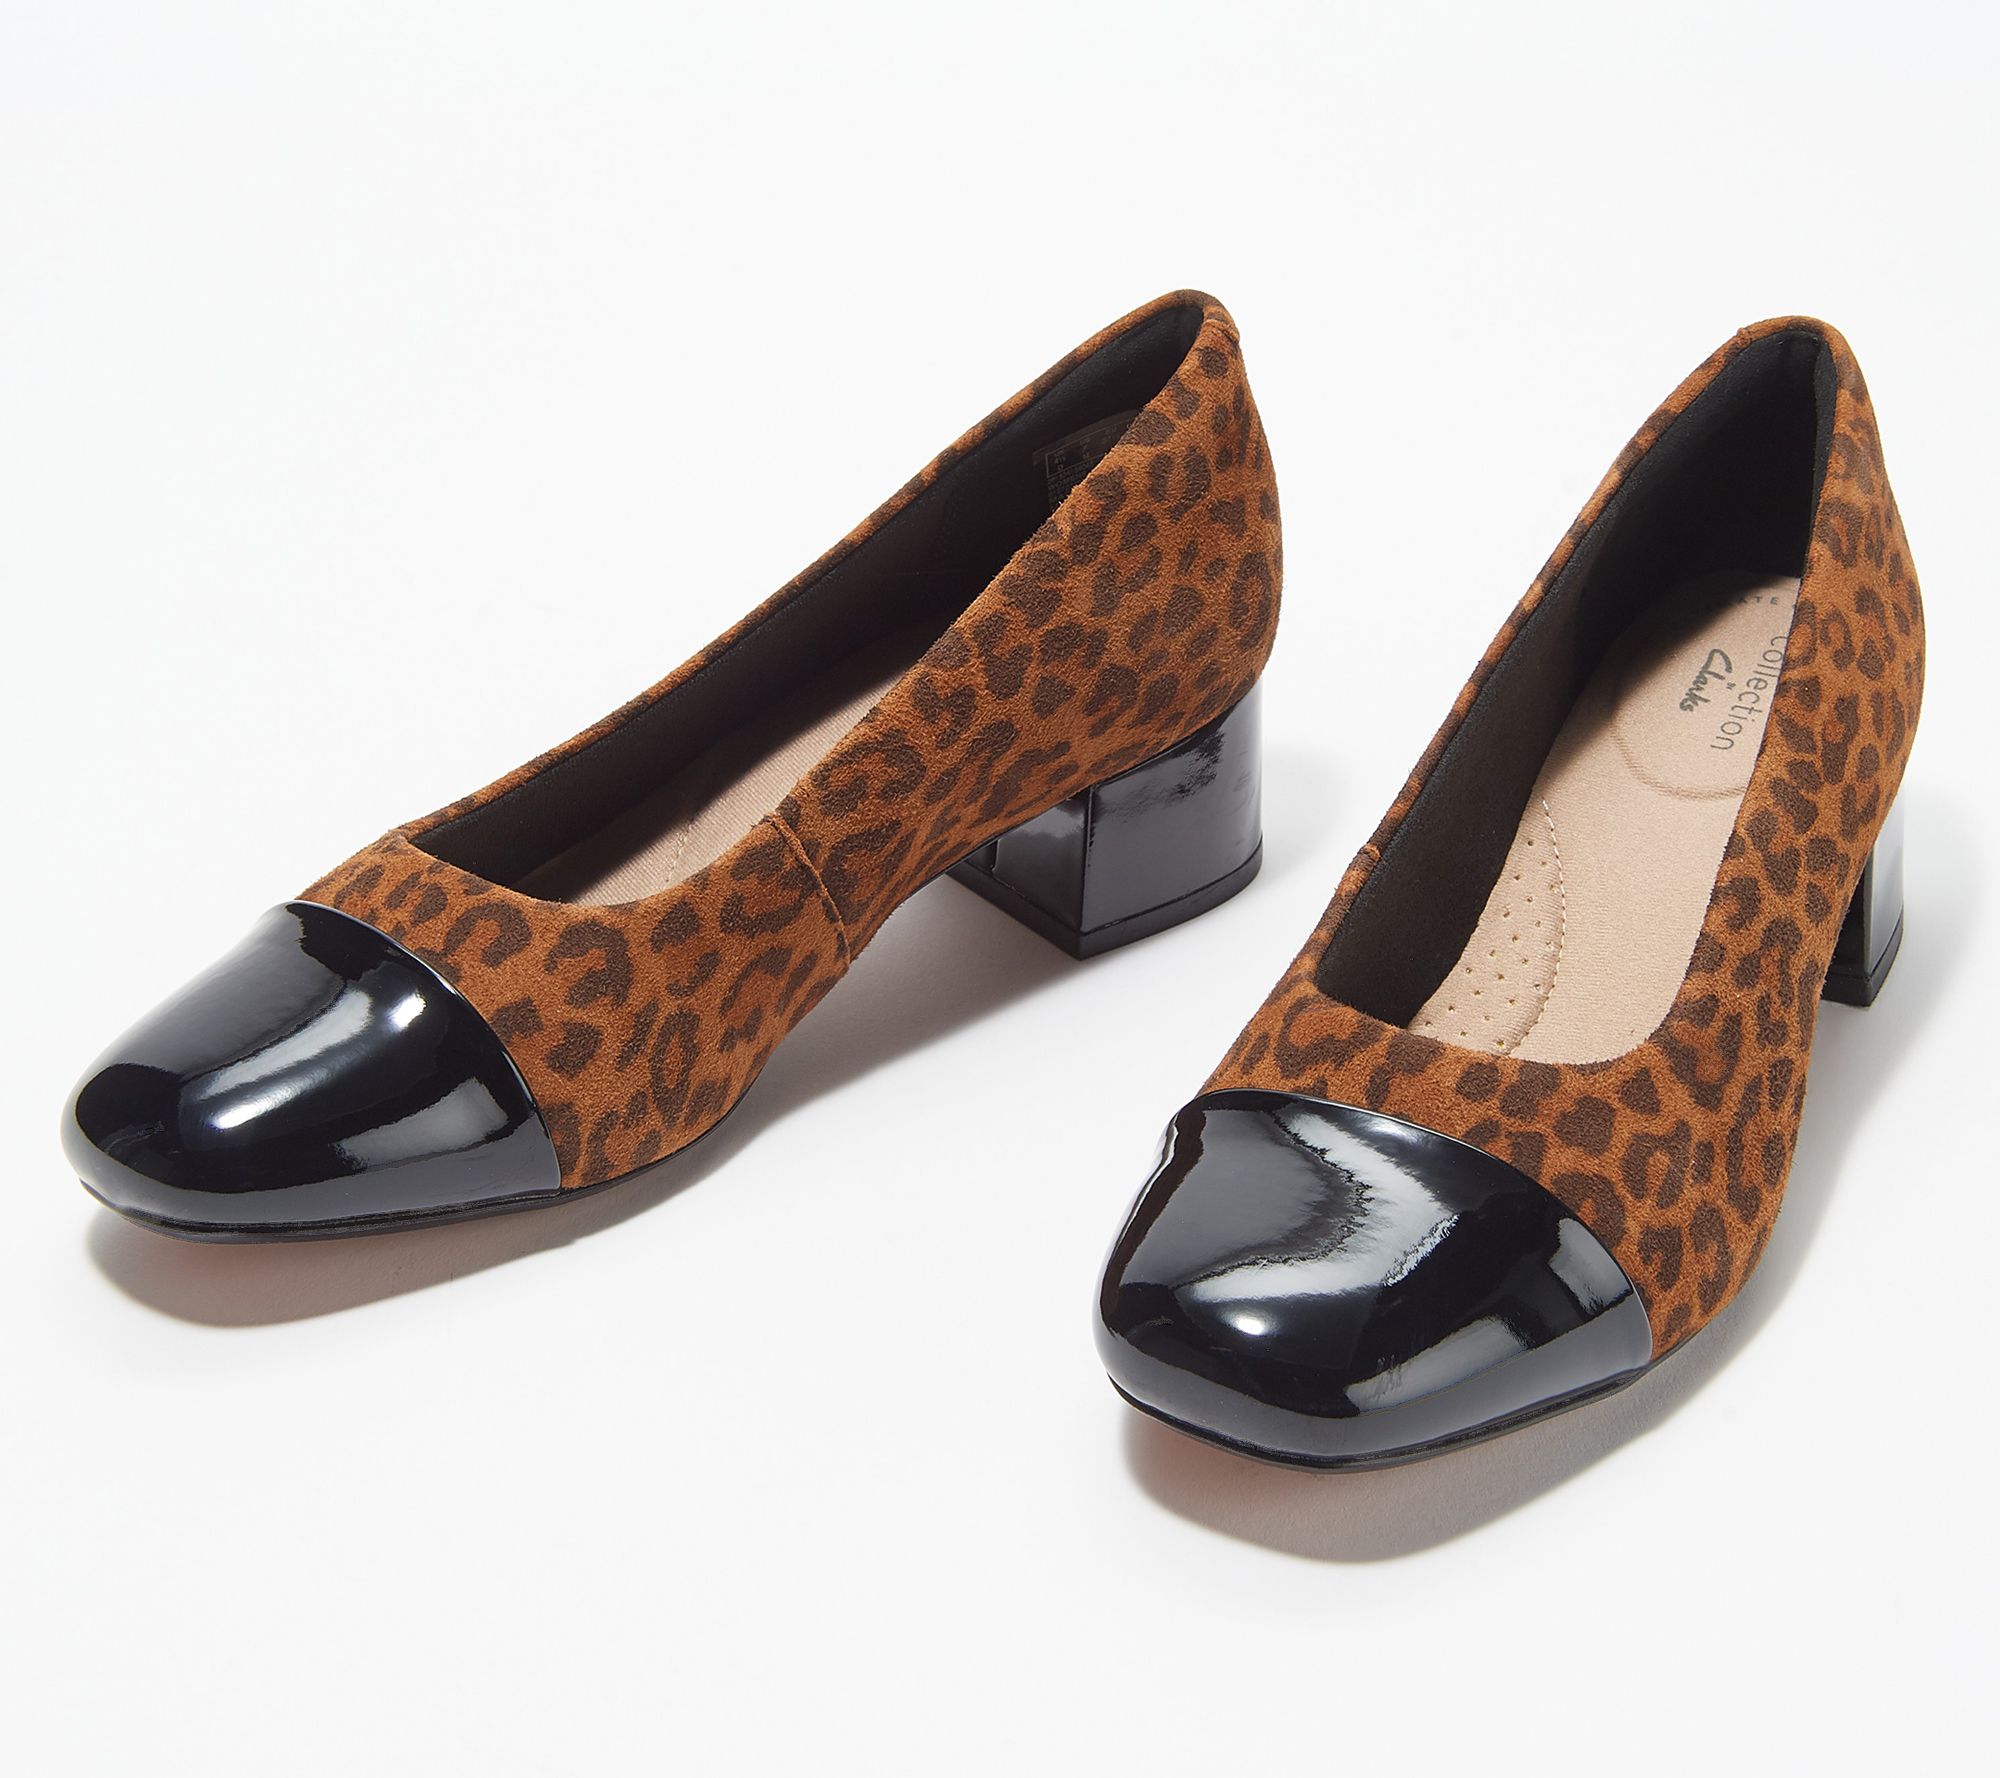 Clarks Collection Leather or Textile Pumps - Marilyn Sara - QVC.com